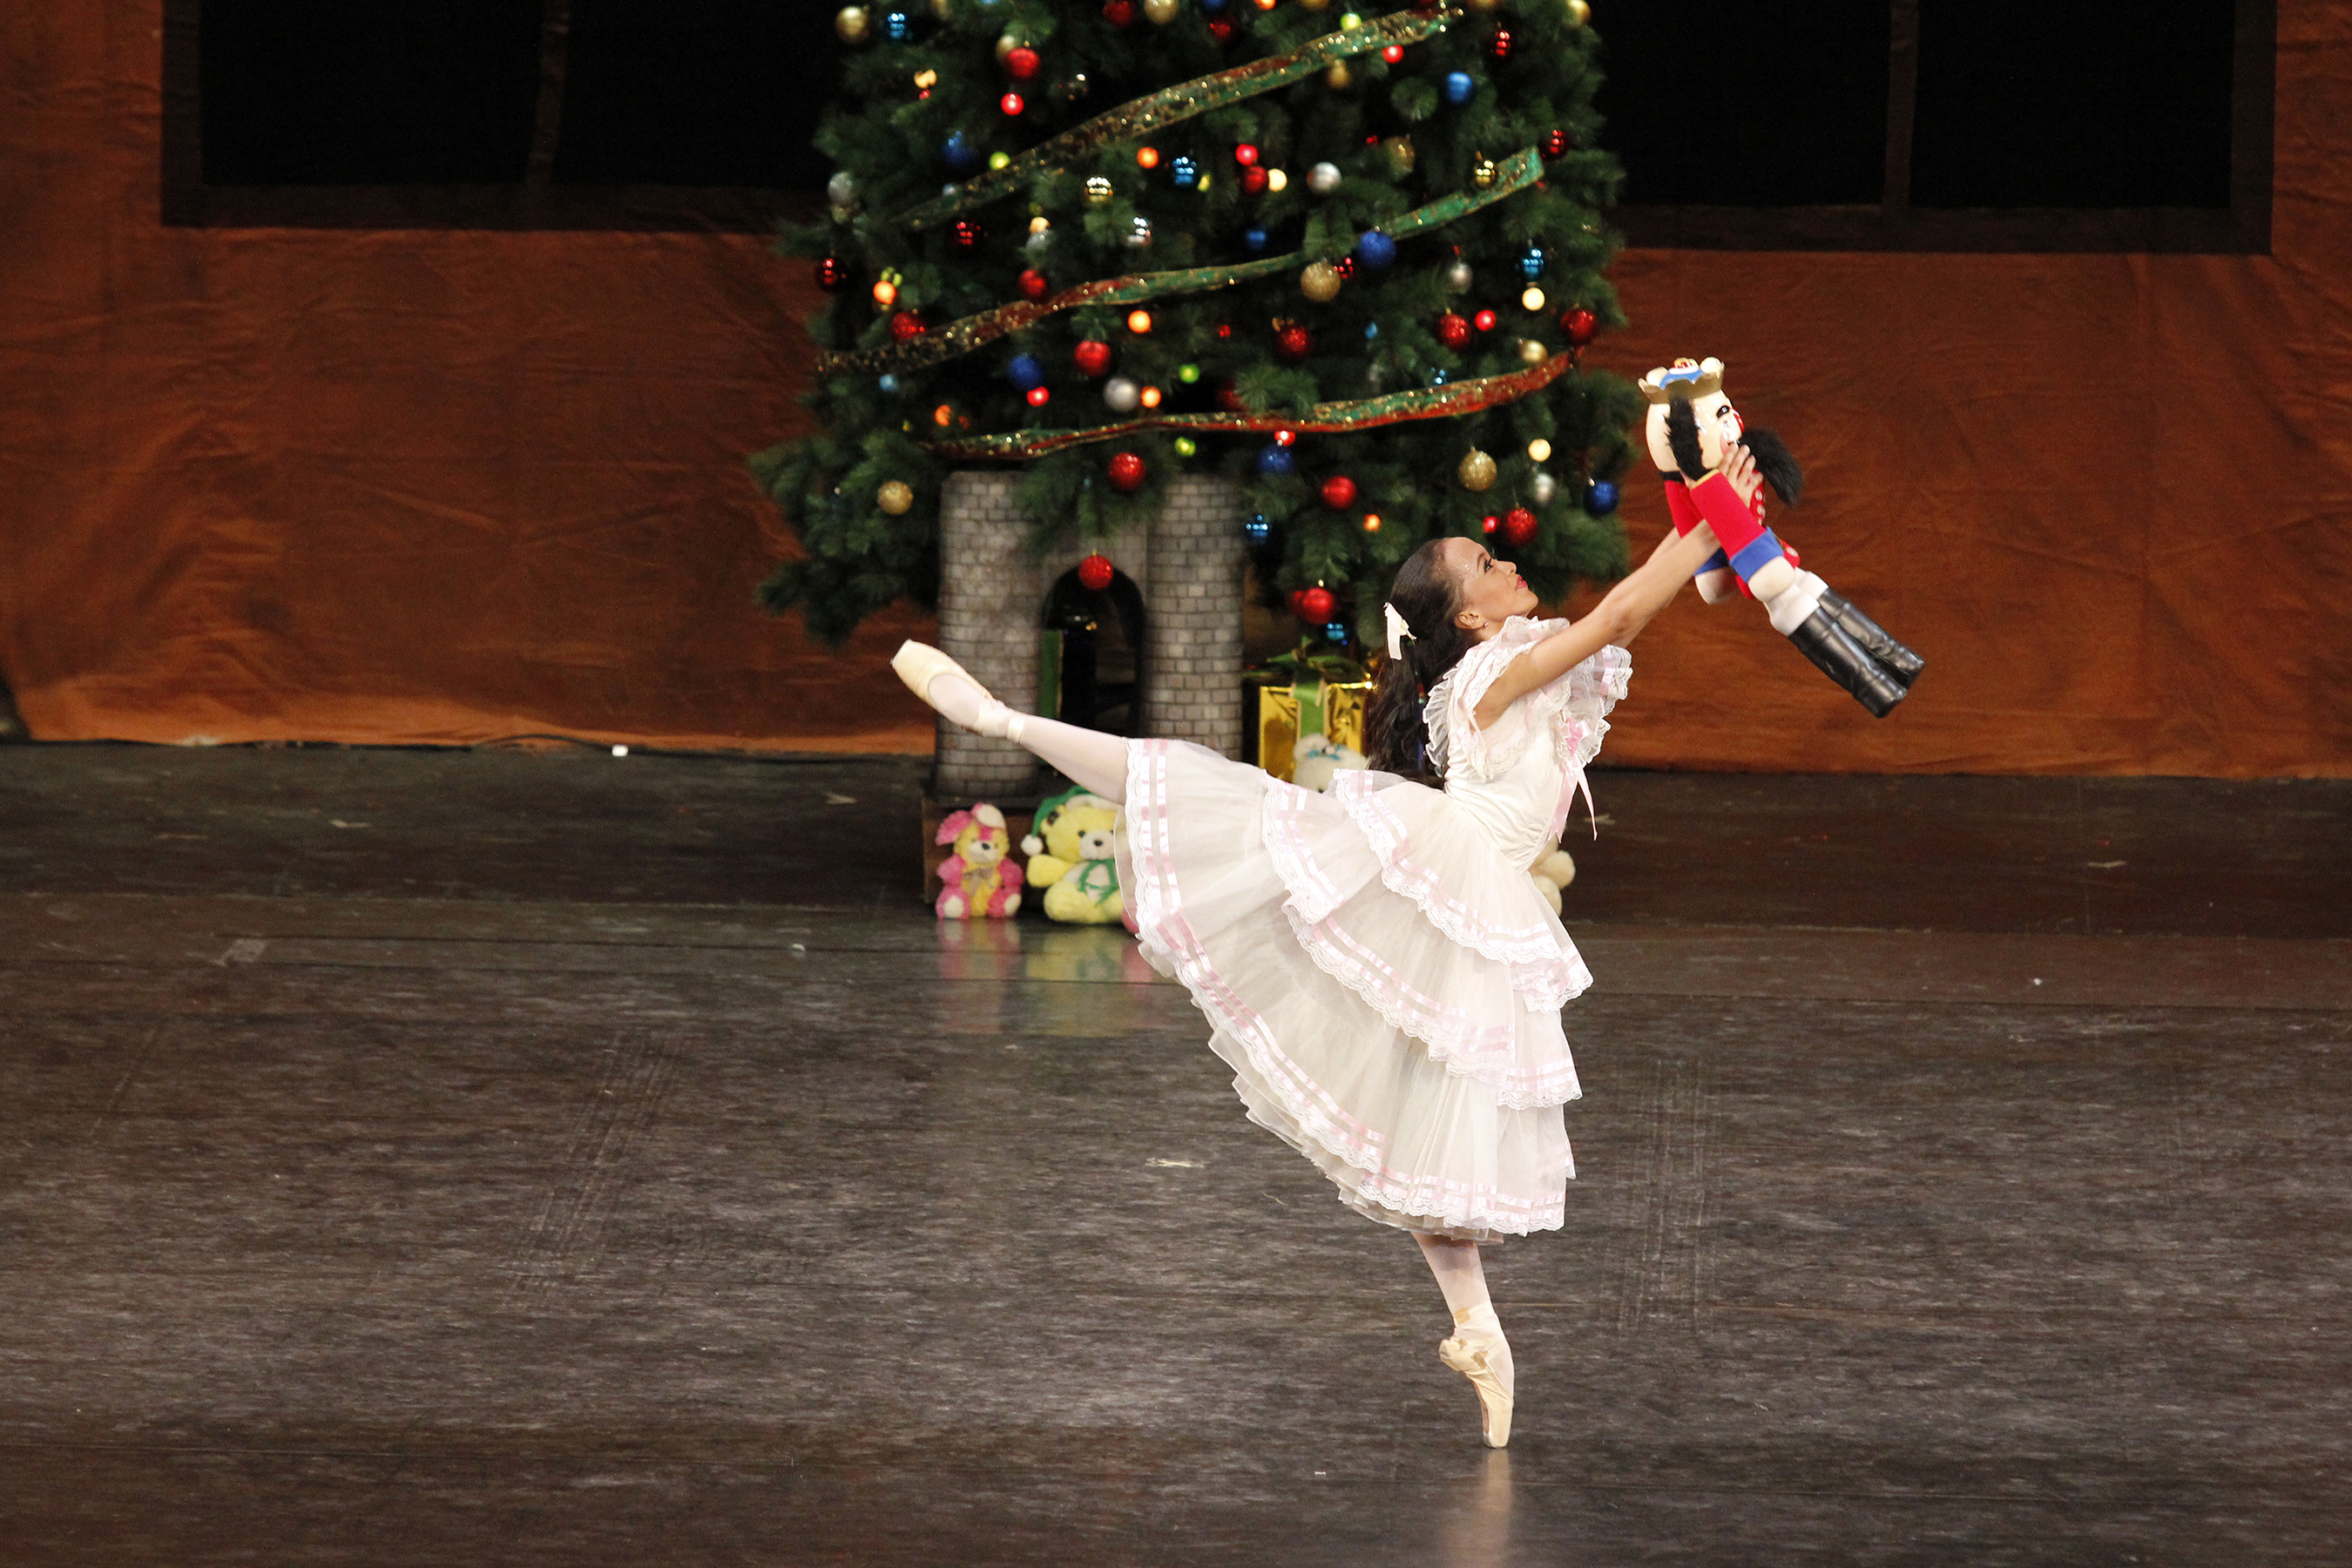 Among Jessa's most memorable performances was the role of Masha in the much-loved ballet, The Nutcracker